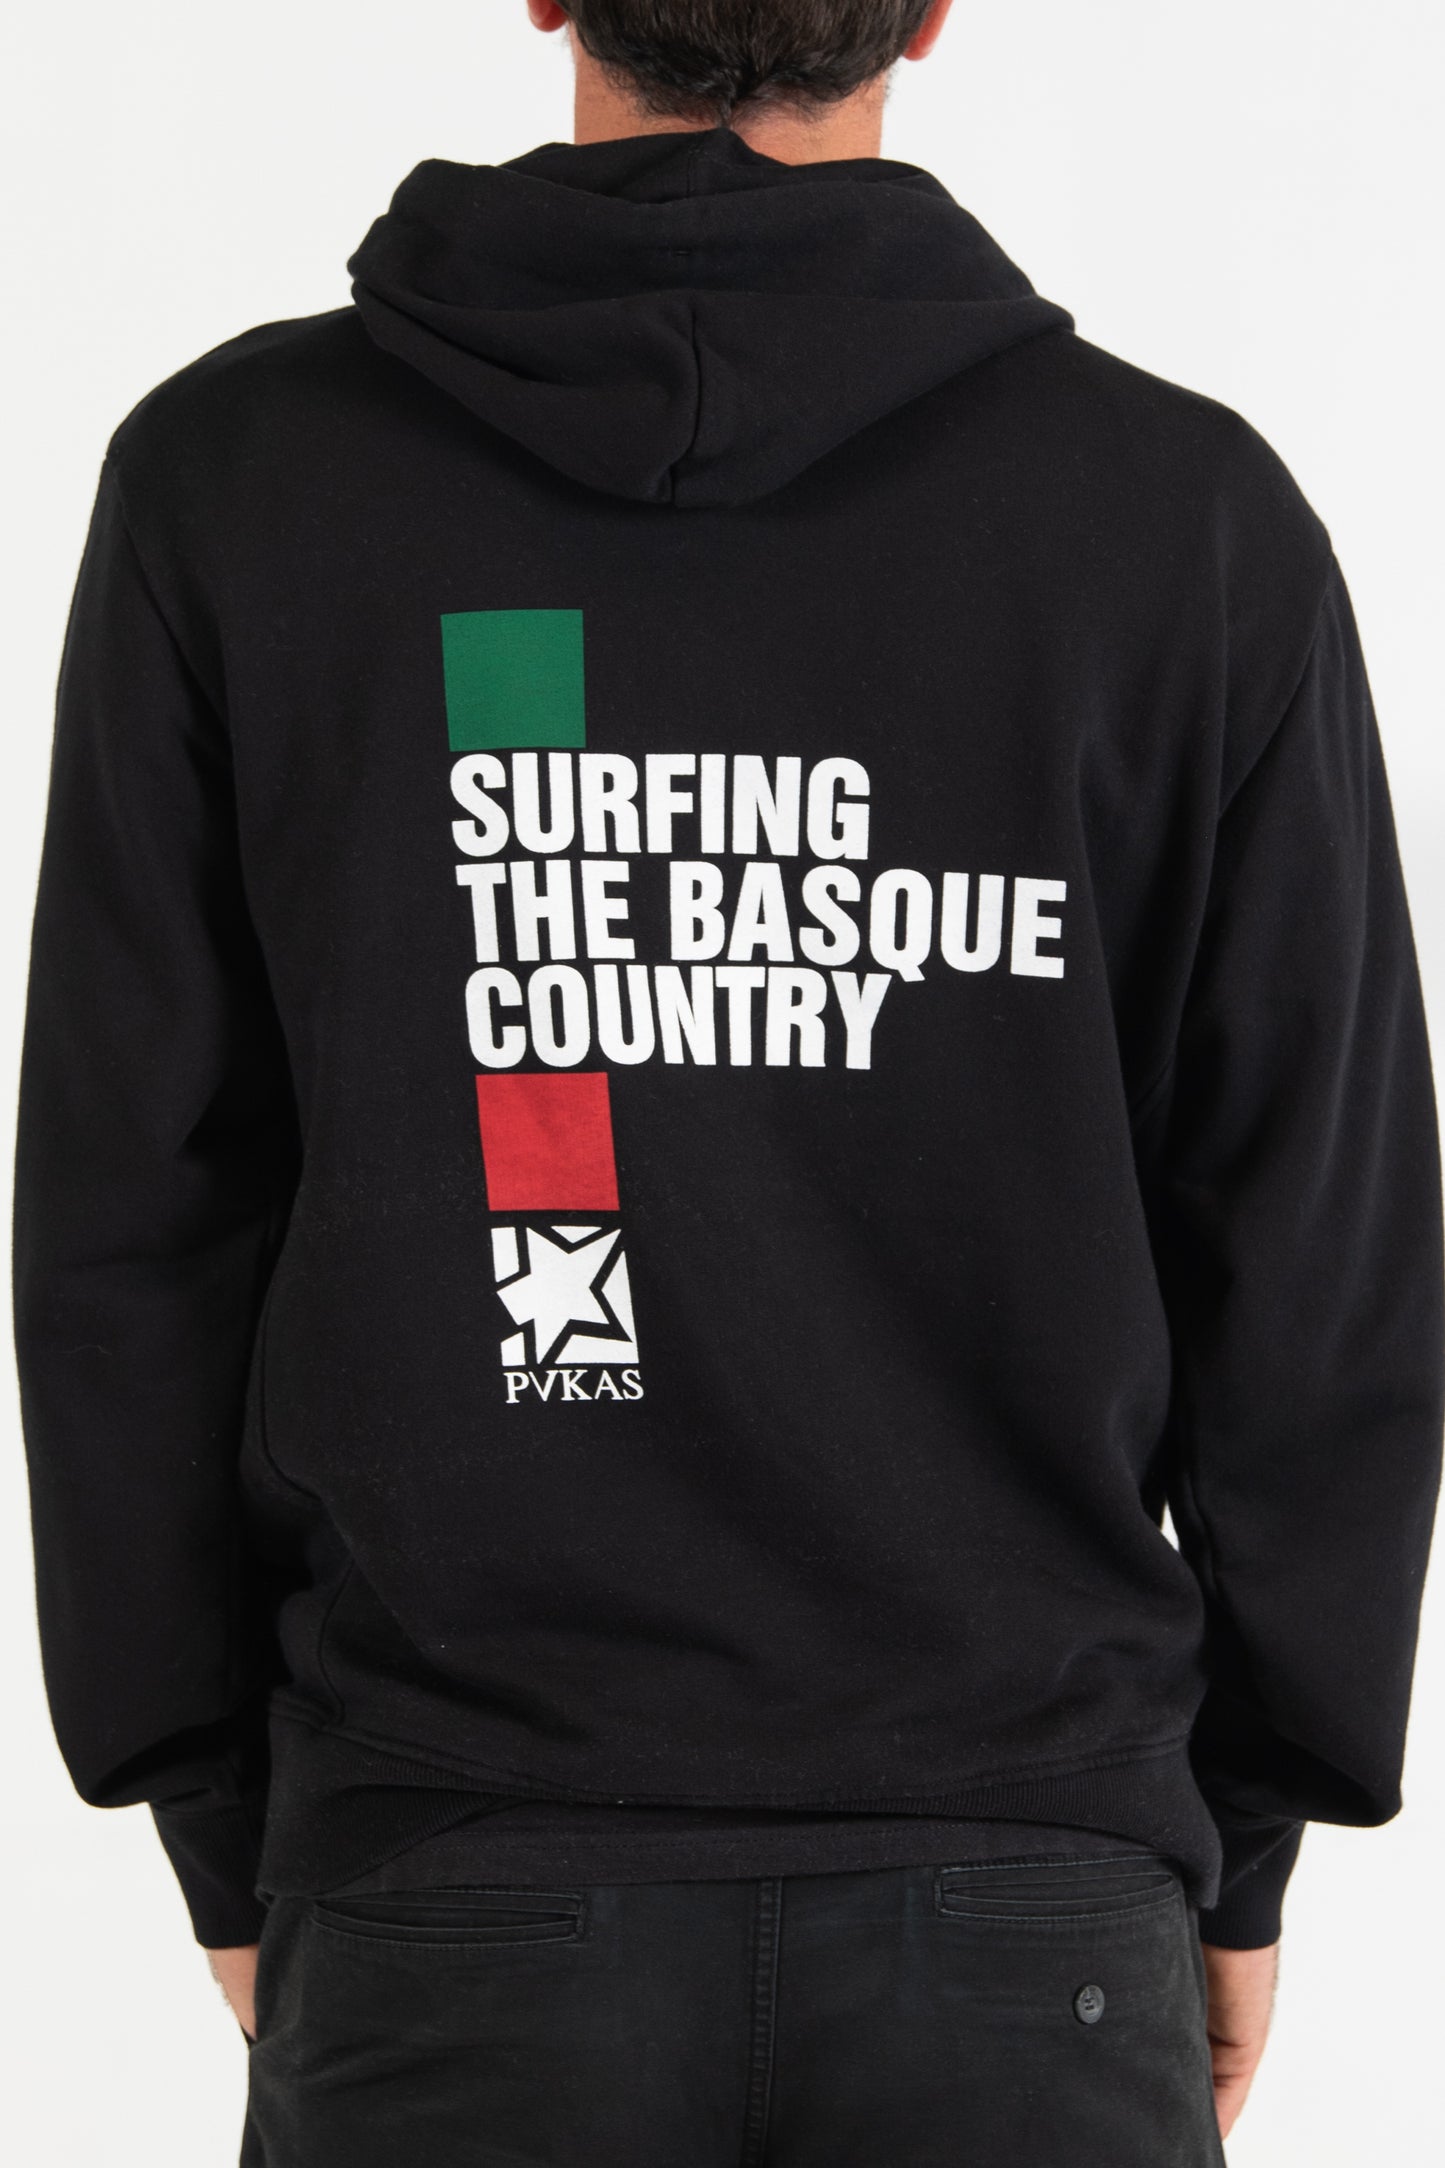       Pukas-Surf-Shop-Surfing-the-basque-country-classic-black-man